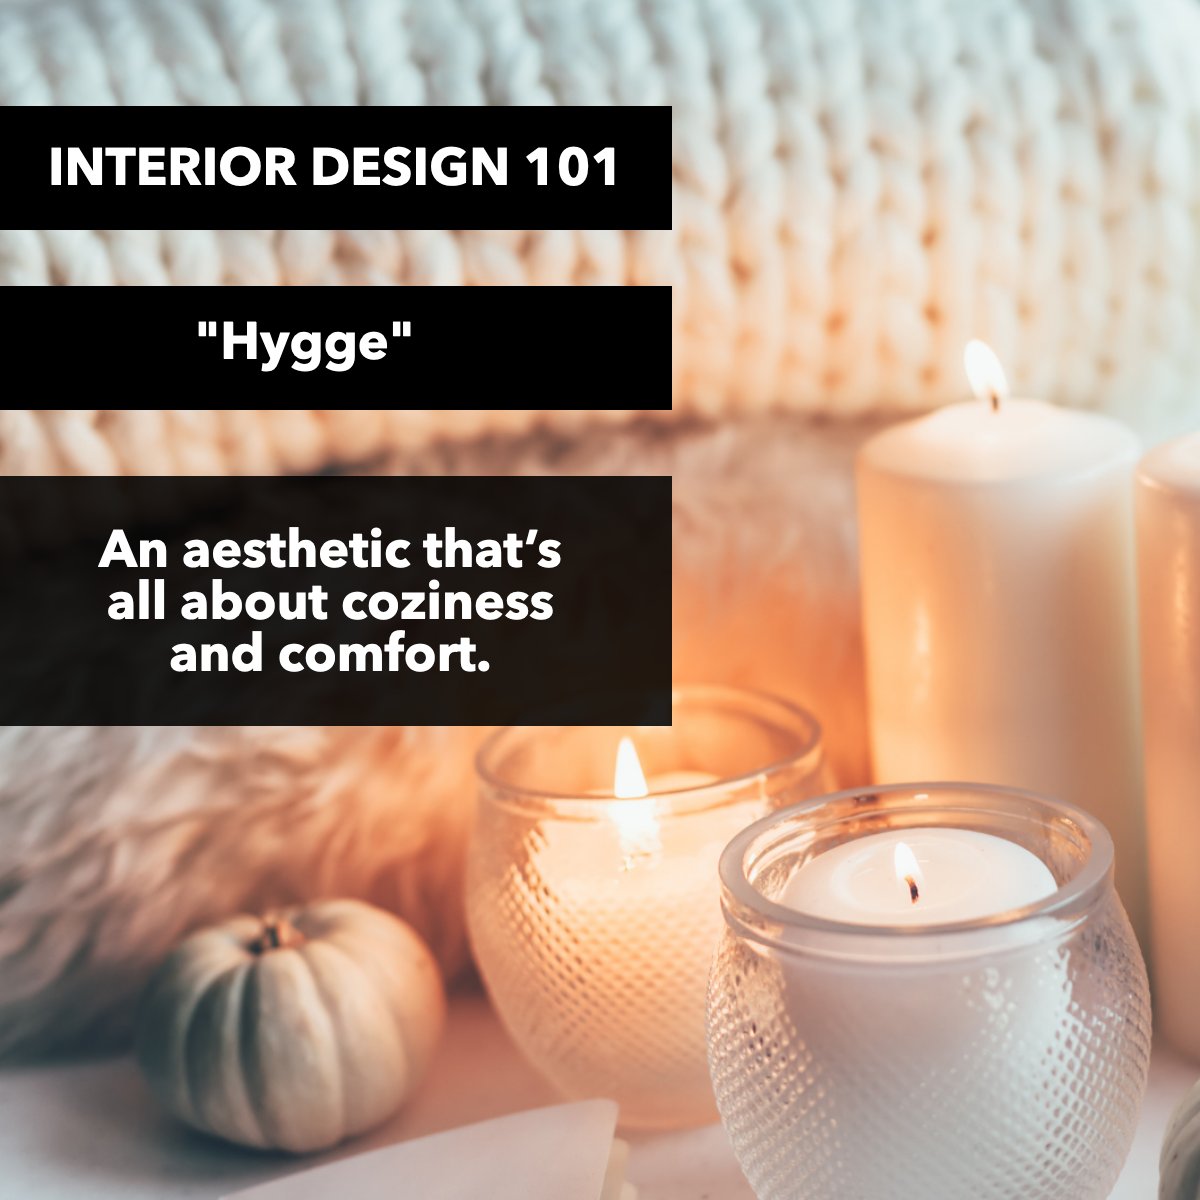 There are many terms in modern interior design that can help you to improve your spaces at home.

👀 Have you heard about the 'hyge' aesthetic? 

#interiorsdesign #interiortrends #interiordesigning #interiordesigntrends #interiorsaddict #interiordesigntips